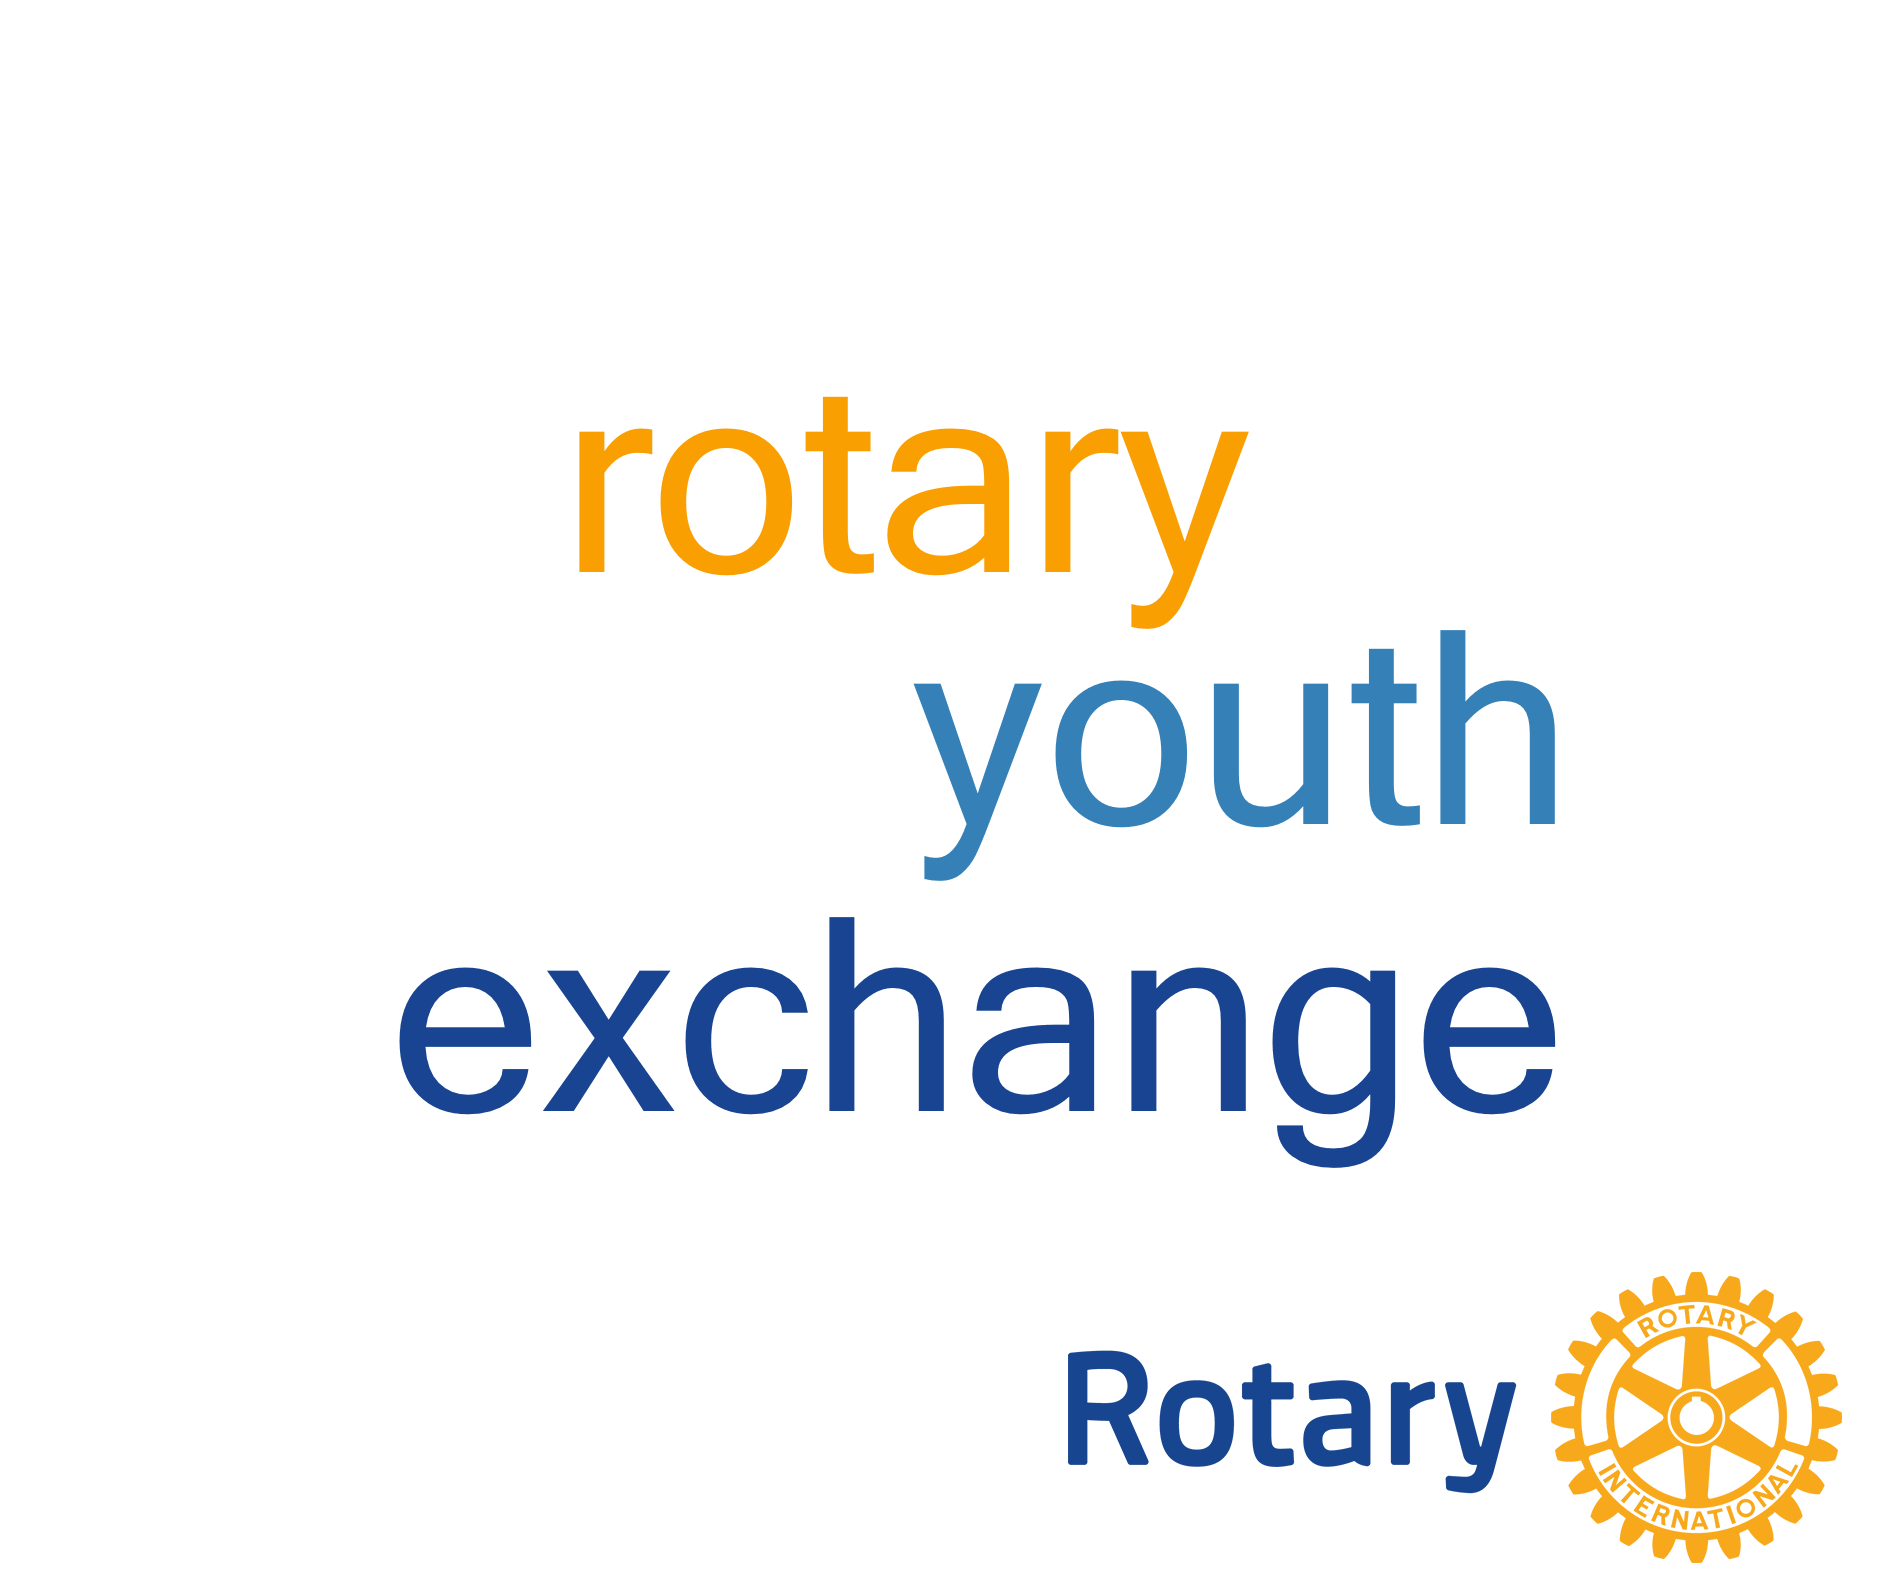 A Great Article About Rotary Youth Exchange